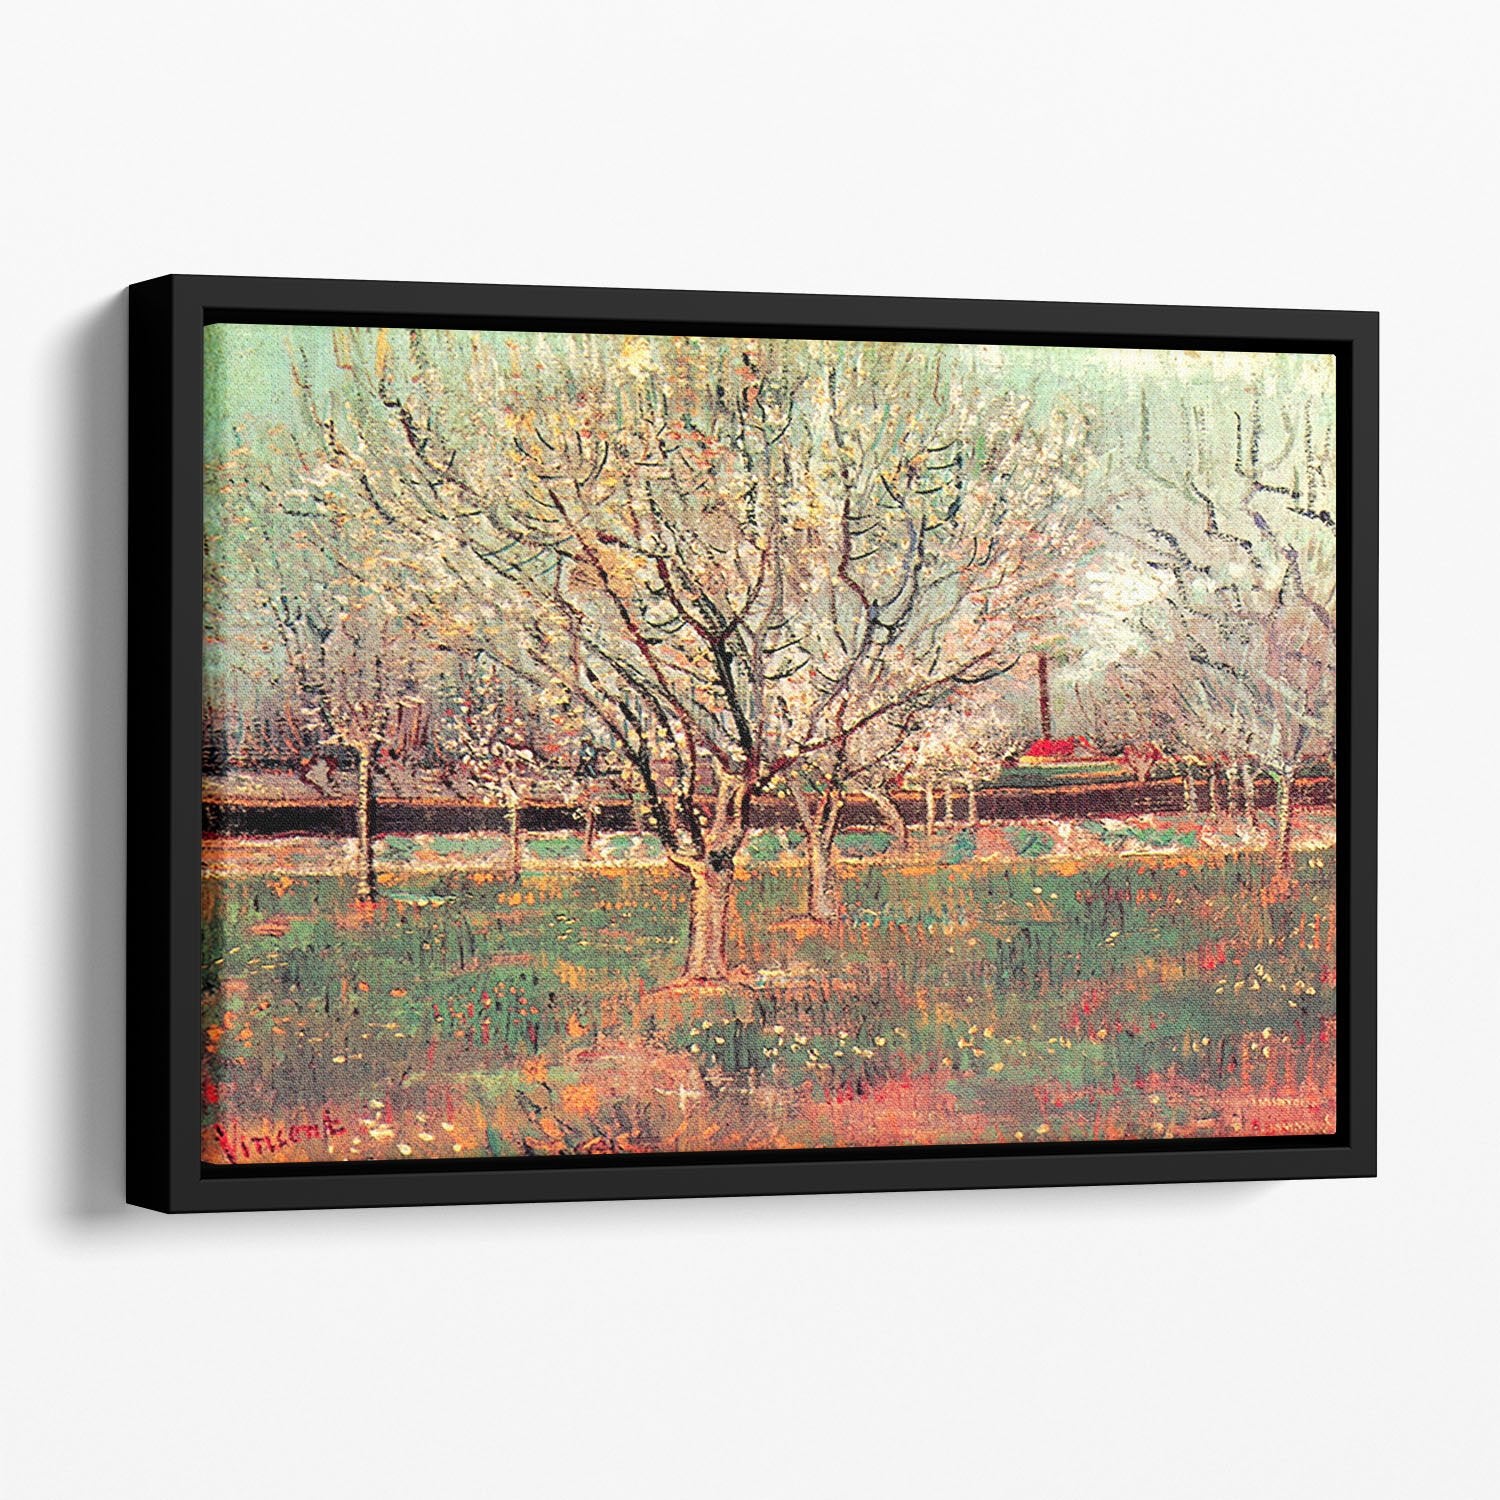 Orchard in Blossom Plum Trees by Van Gogh Floating Framed Canvas